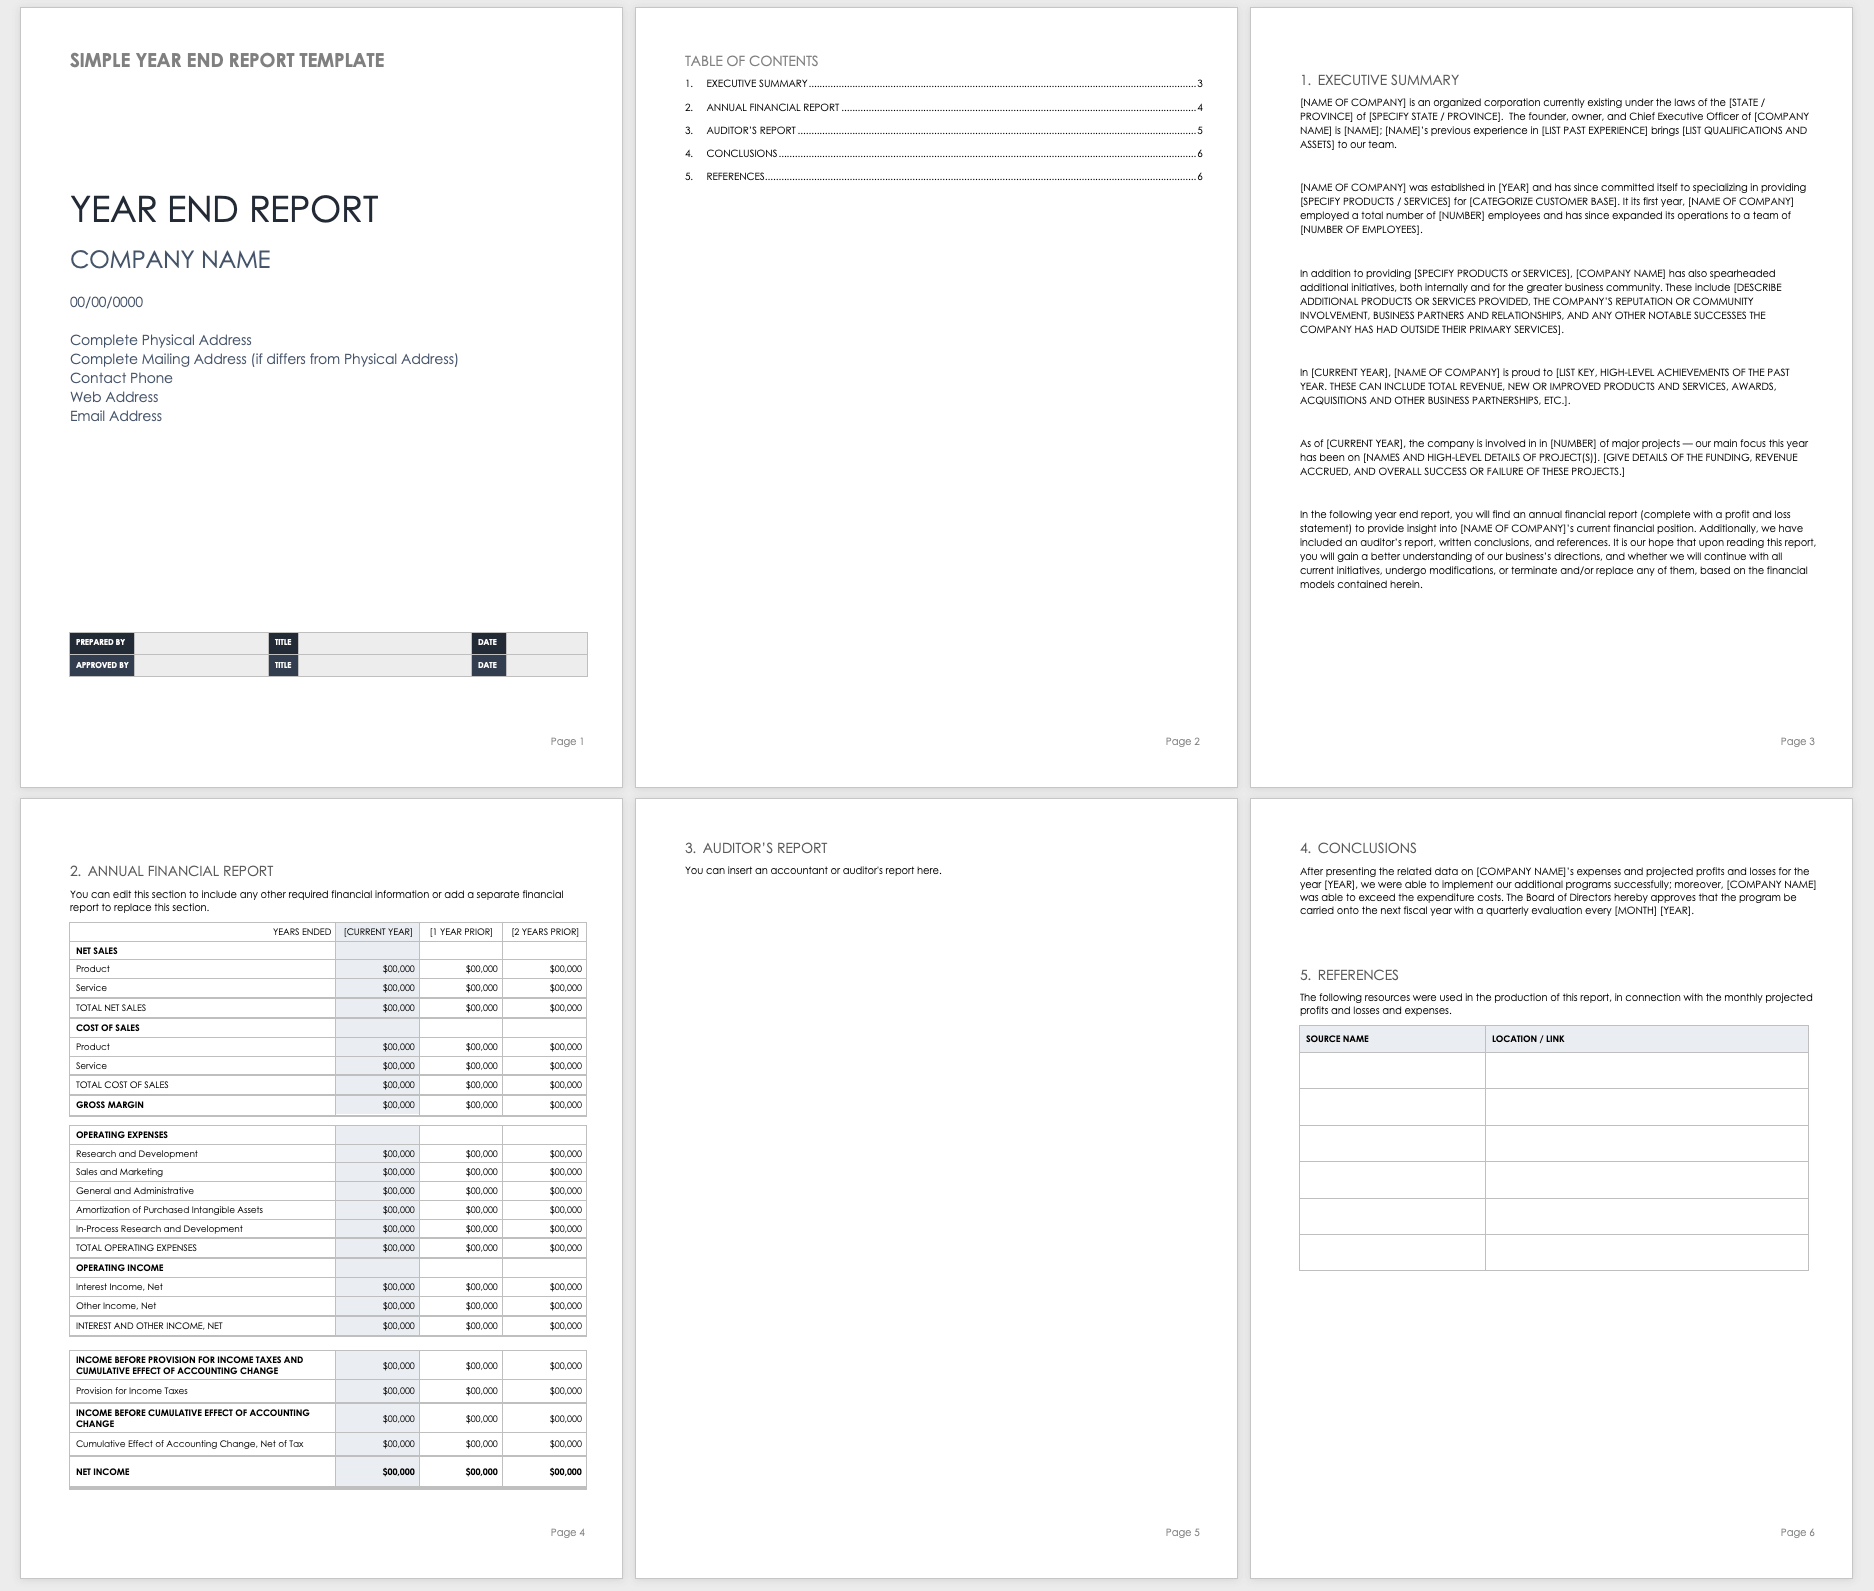 Free Year End Report Templates | Smartsheet Pertaining To Annual Financial Report Template Word